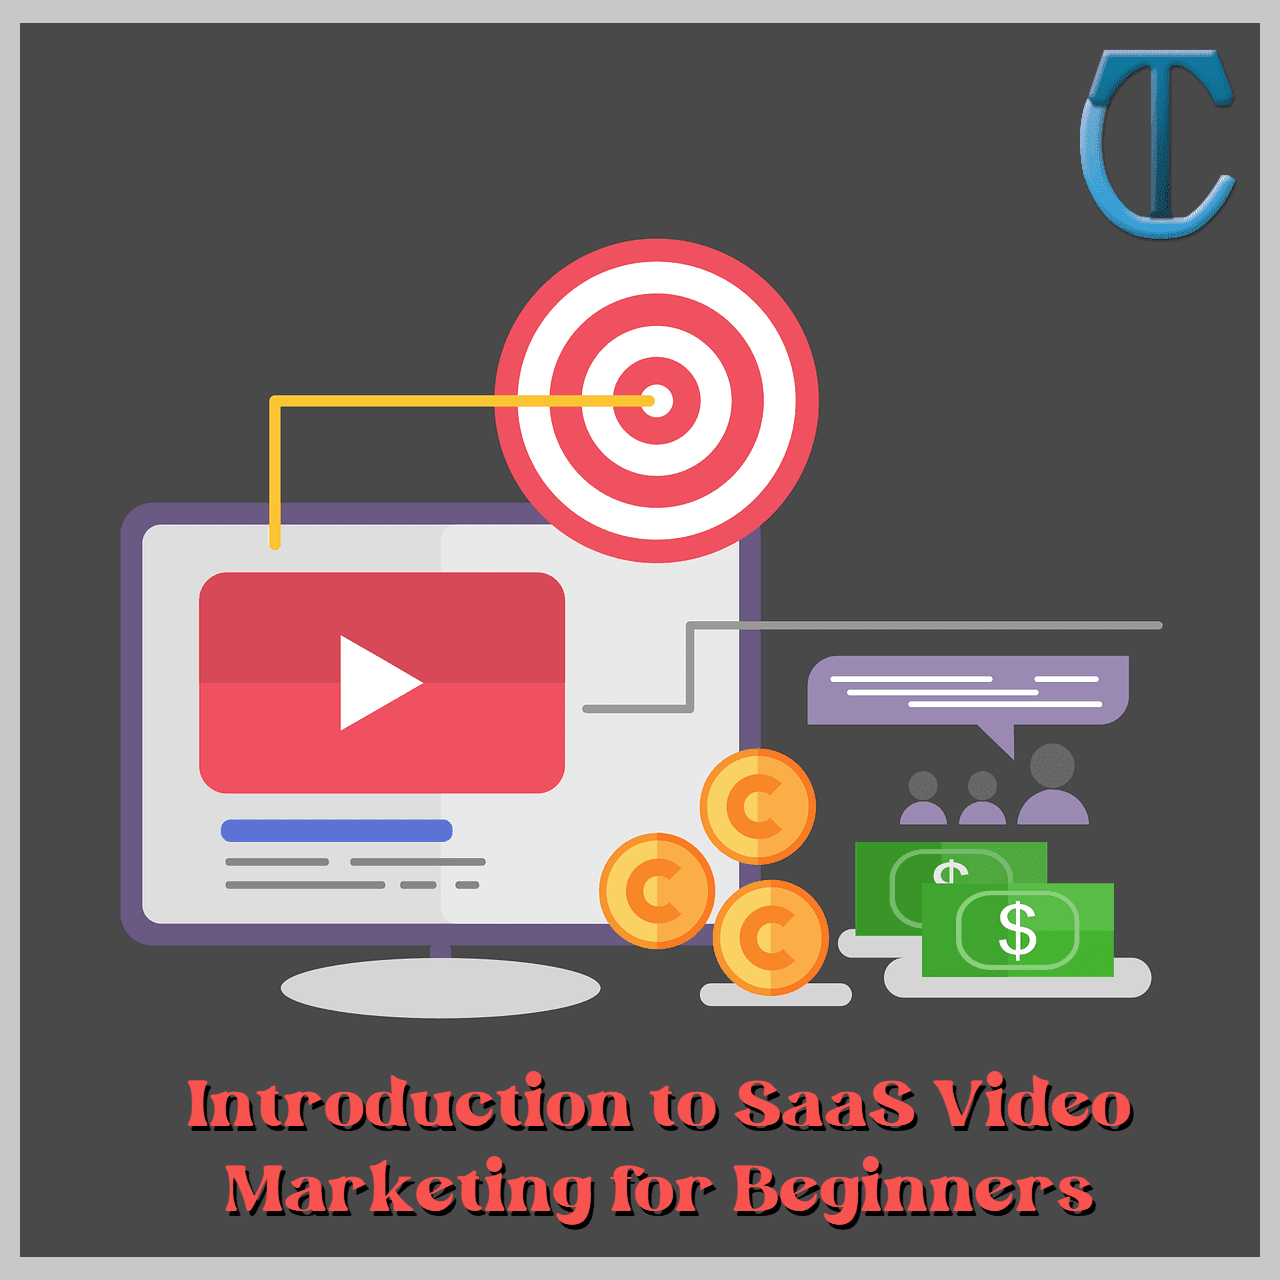 Introduction to SaaS Video Marketing for Beginners